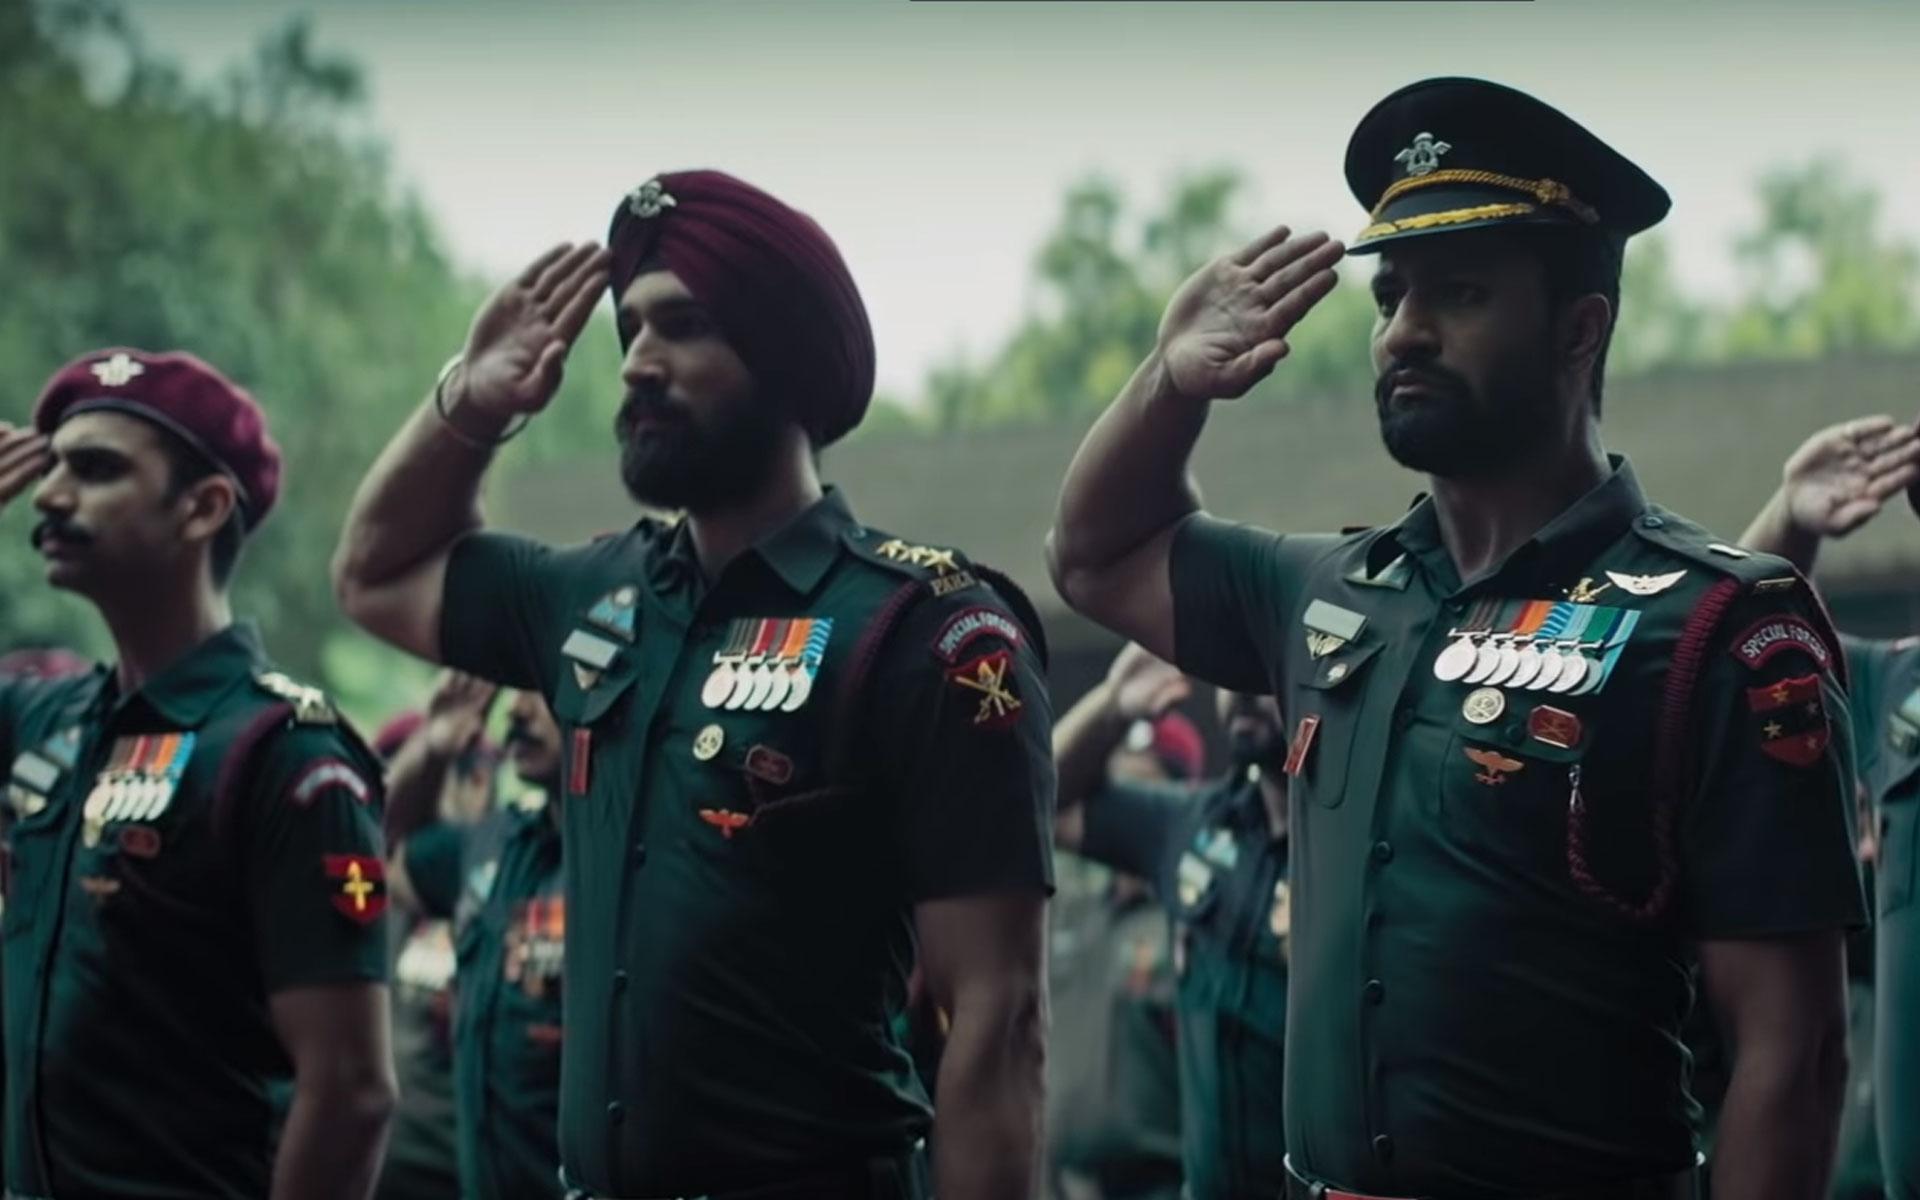 URI - The Surgical Strike Photos: HD Images, Pictures, Stills, First Look  Posters of URI - The Surgical Strike Movie - FilmiBeat